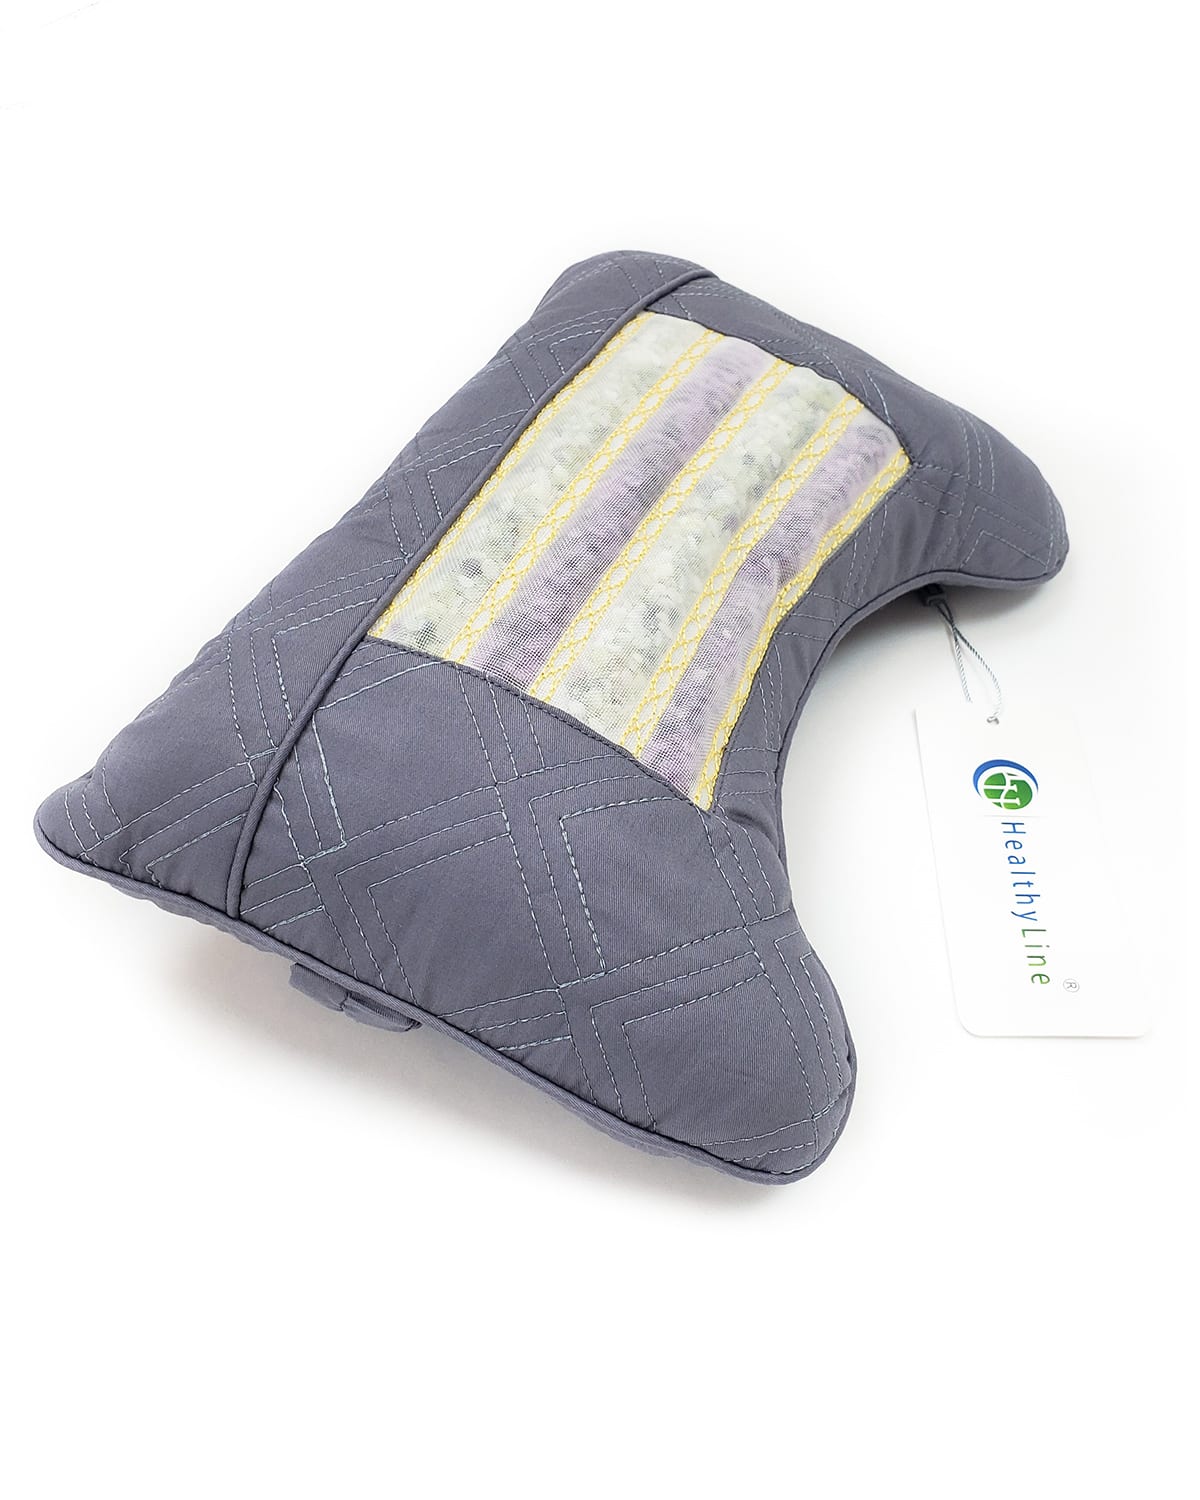 Healthyline Inframat Pro Firm Magnetic Travel Pillow